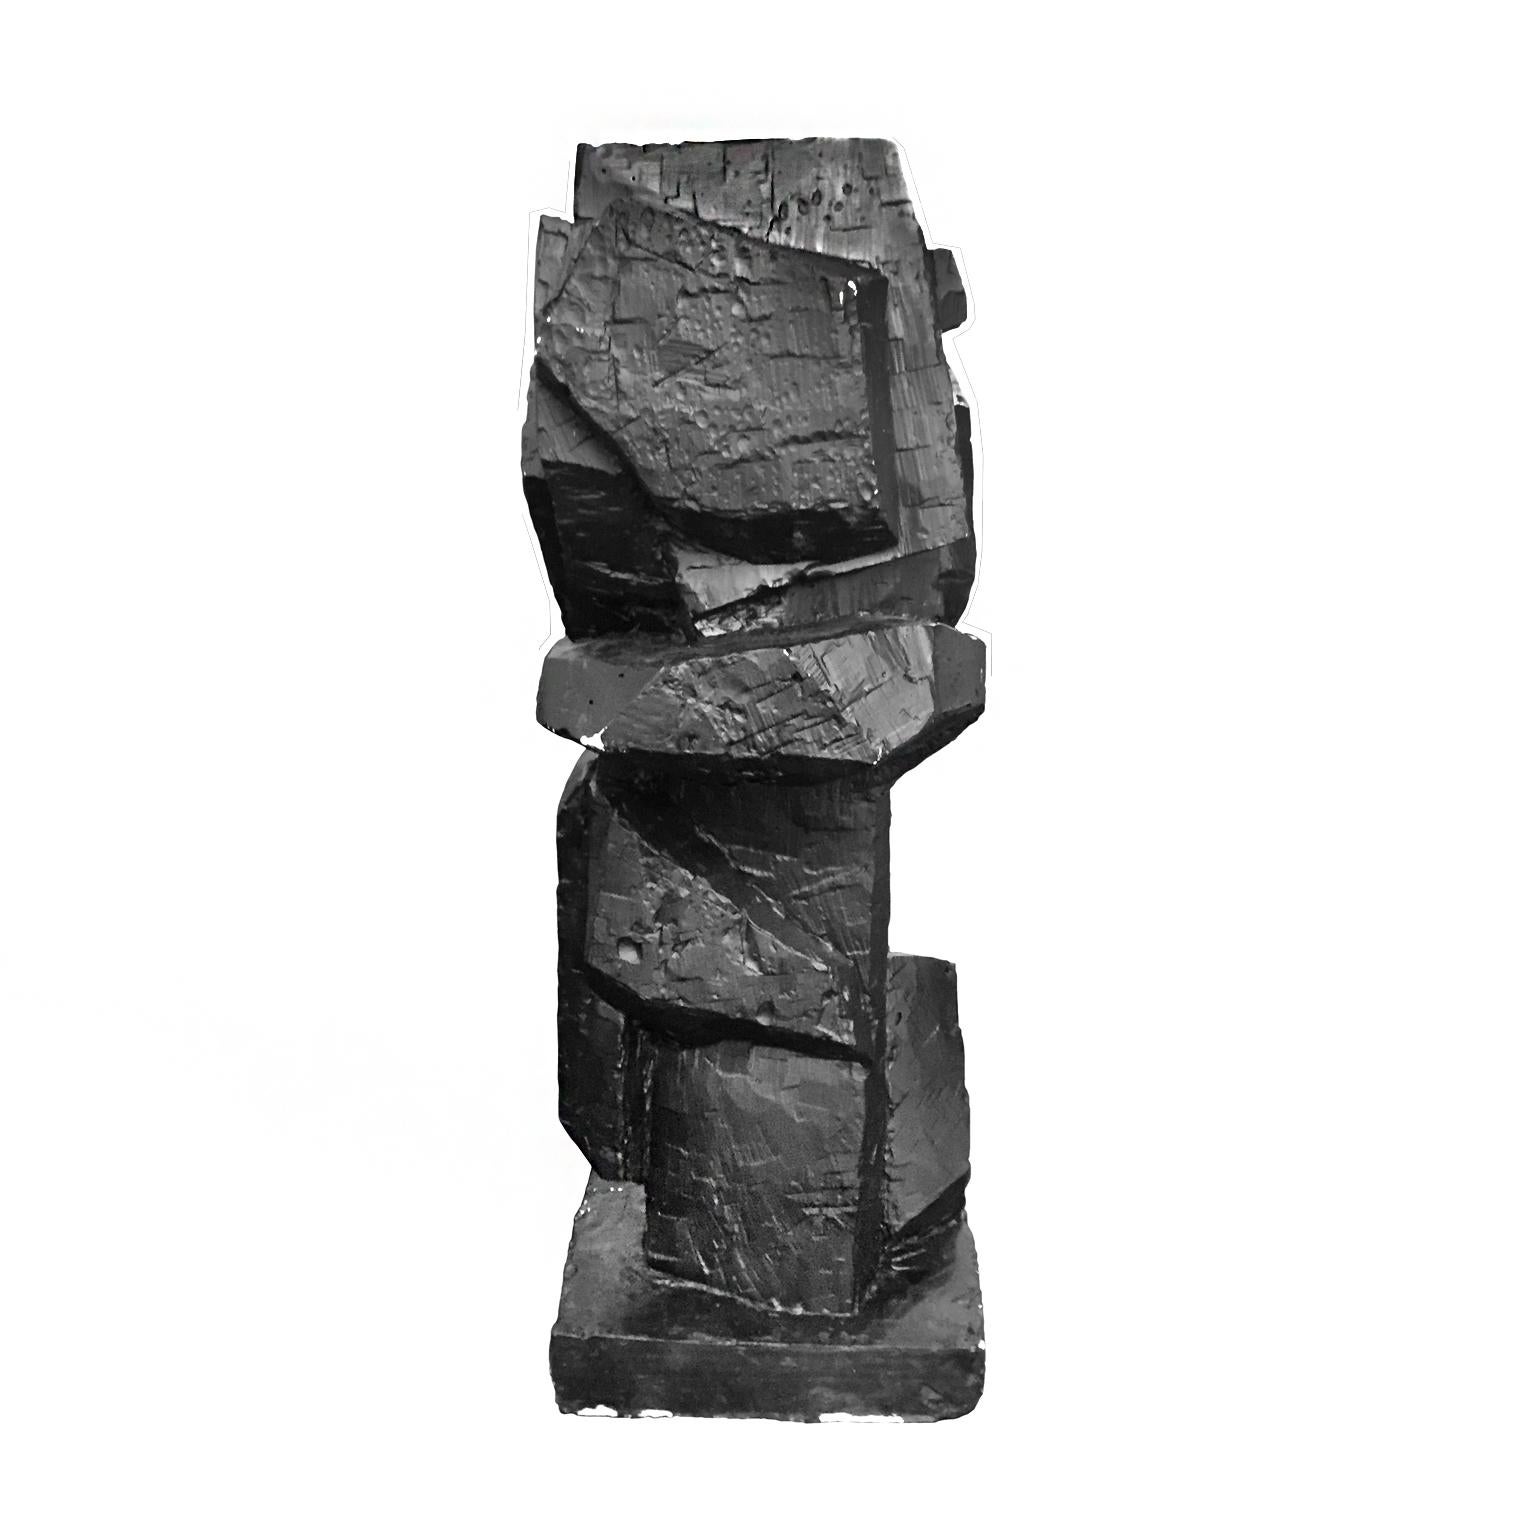 Abstract solid cast plaster sculptures in matte black finish, USA, 1970s.